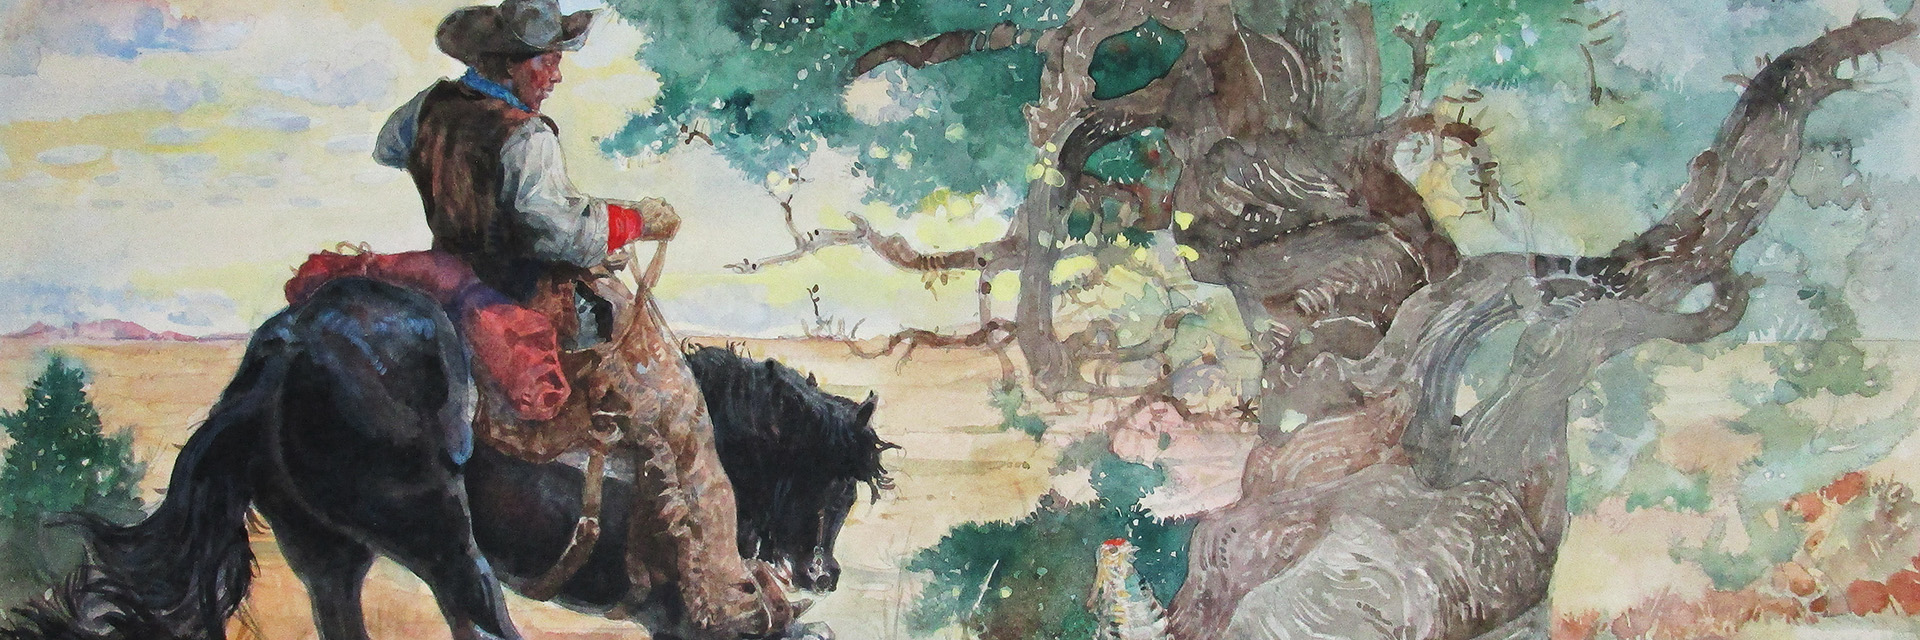  First Light, from Black Cowboys, Wild Horses, 1997, by Jerry Pinkney (Courtesy of the artist)